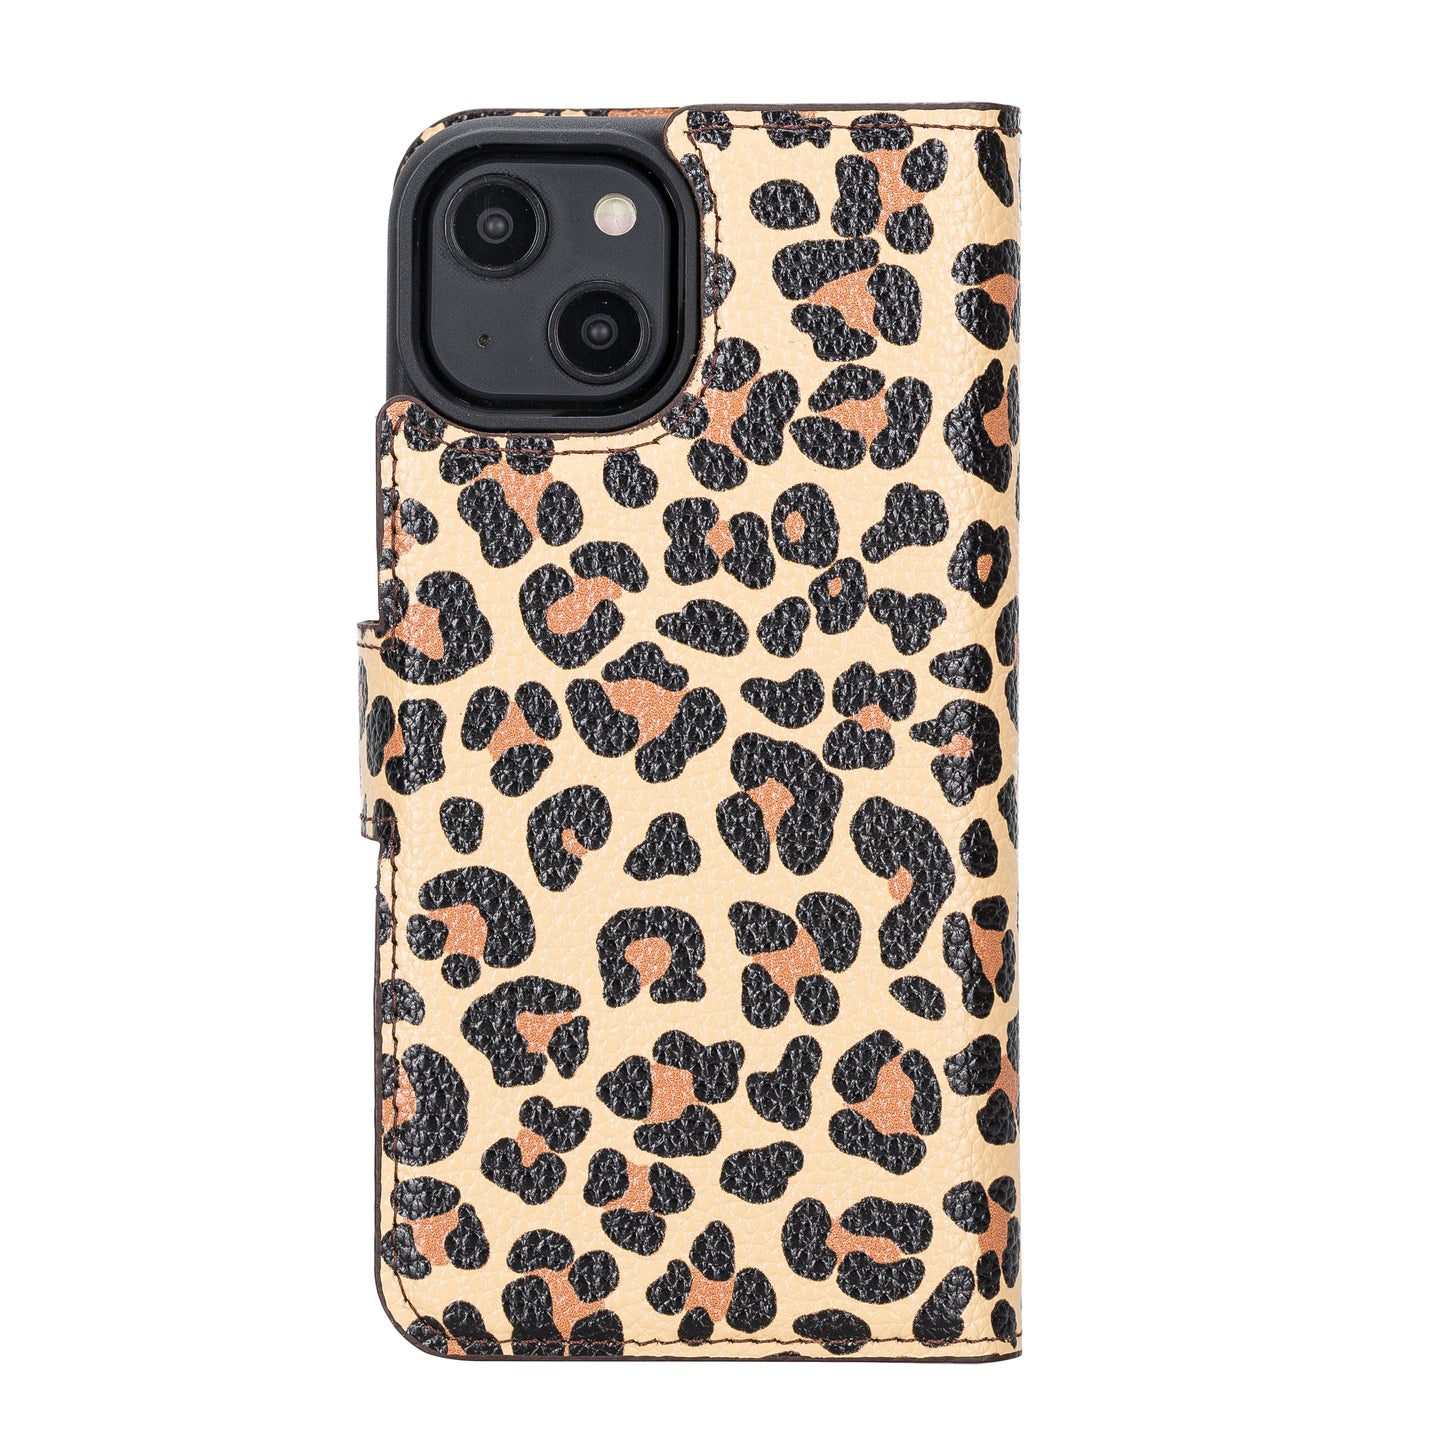 iPhone 14 (6.1") Leather MagSafe RFID Detachable Wallet Case - Leopard